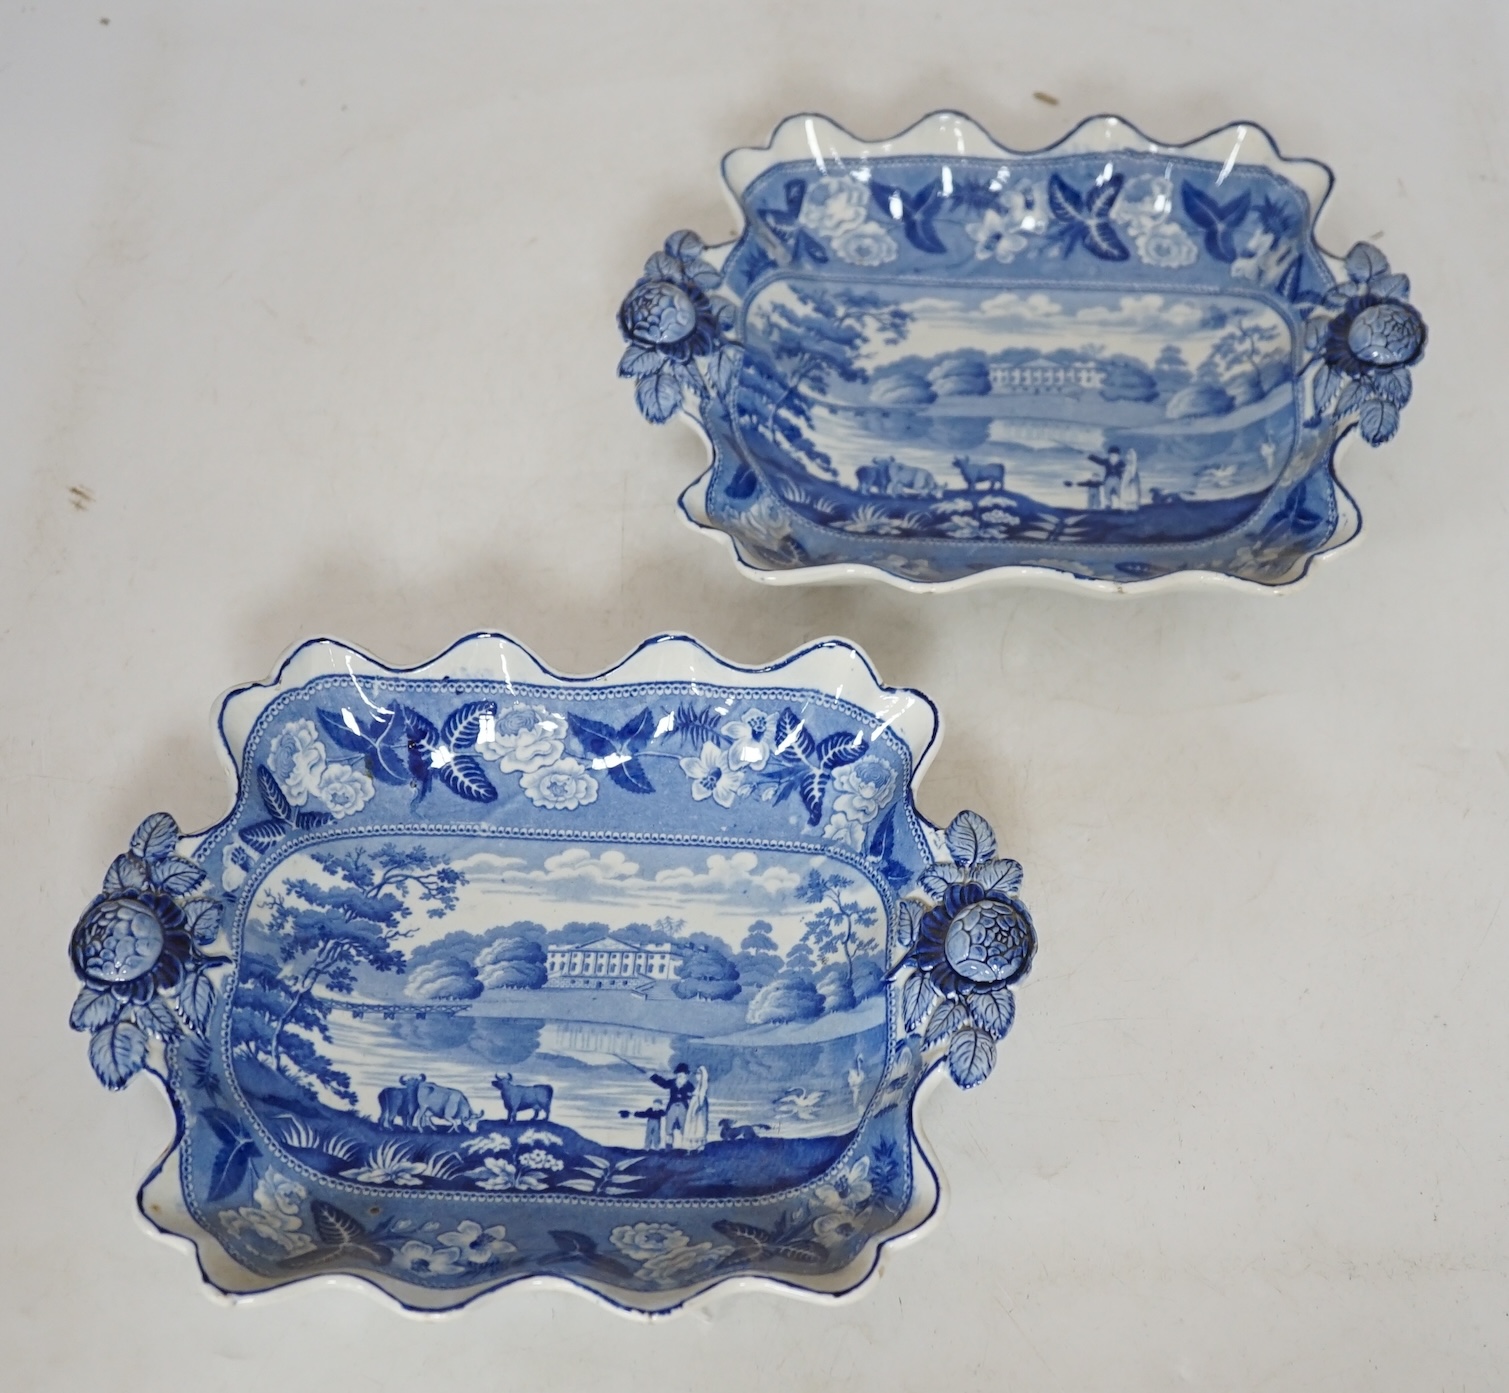 A pair of 19th century ‘British Scenery’, dessert dishes, with floral decorated handles, 24cm wide. Condition - good